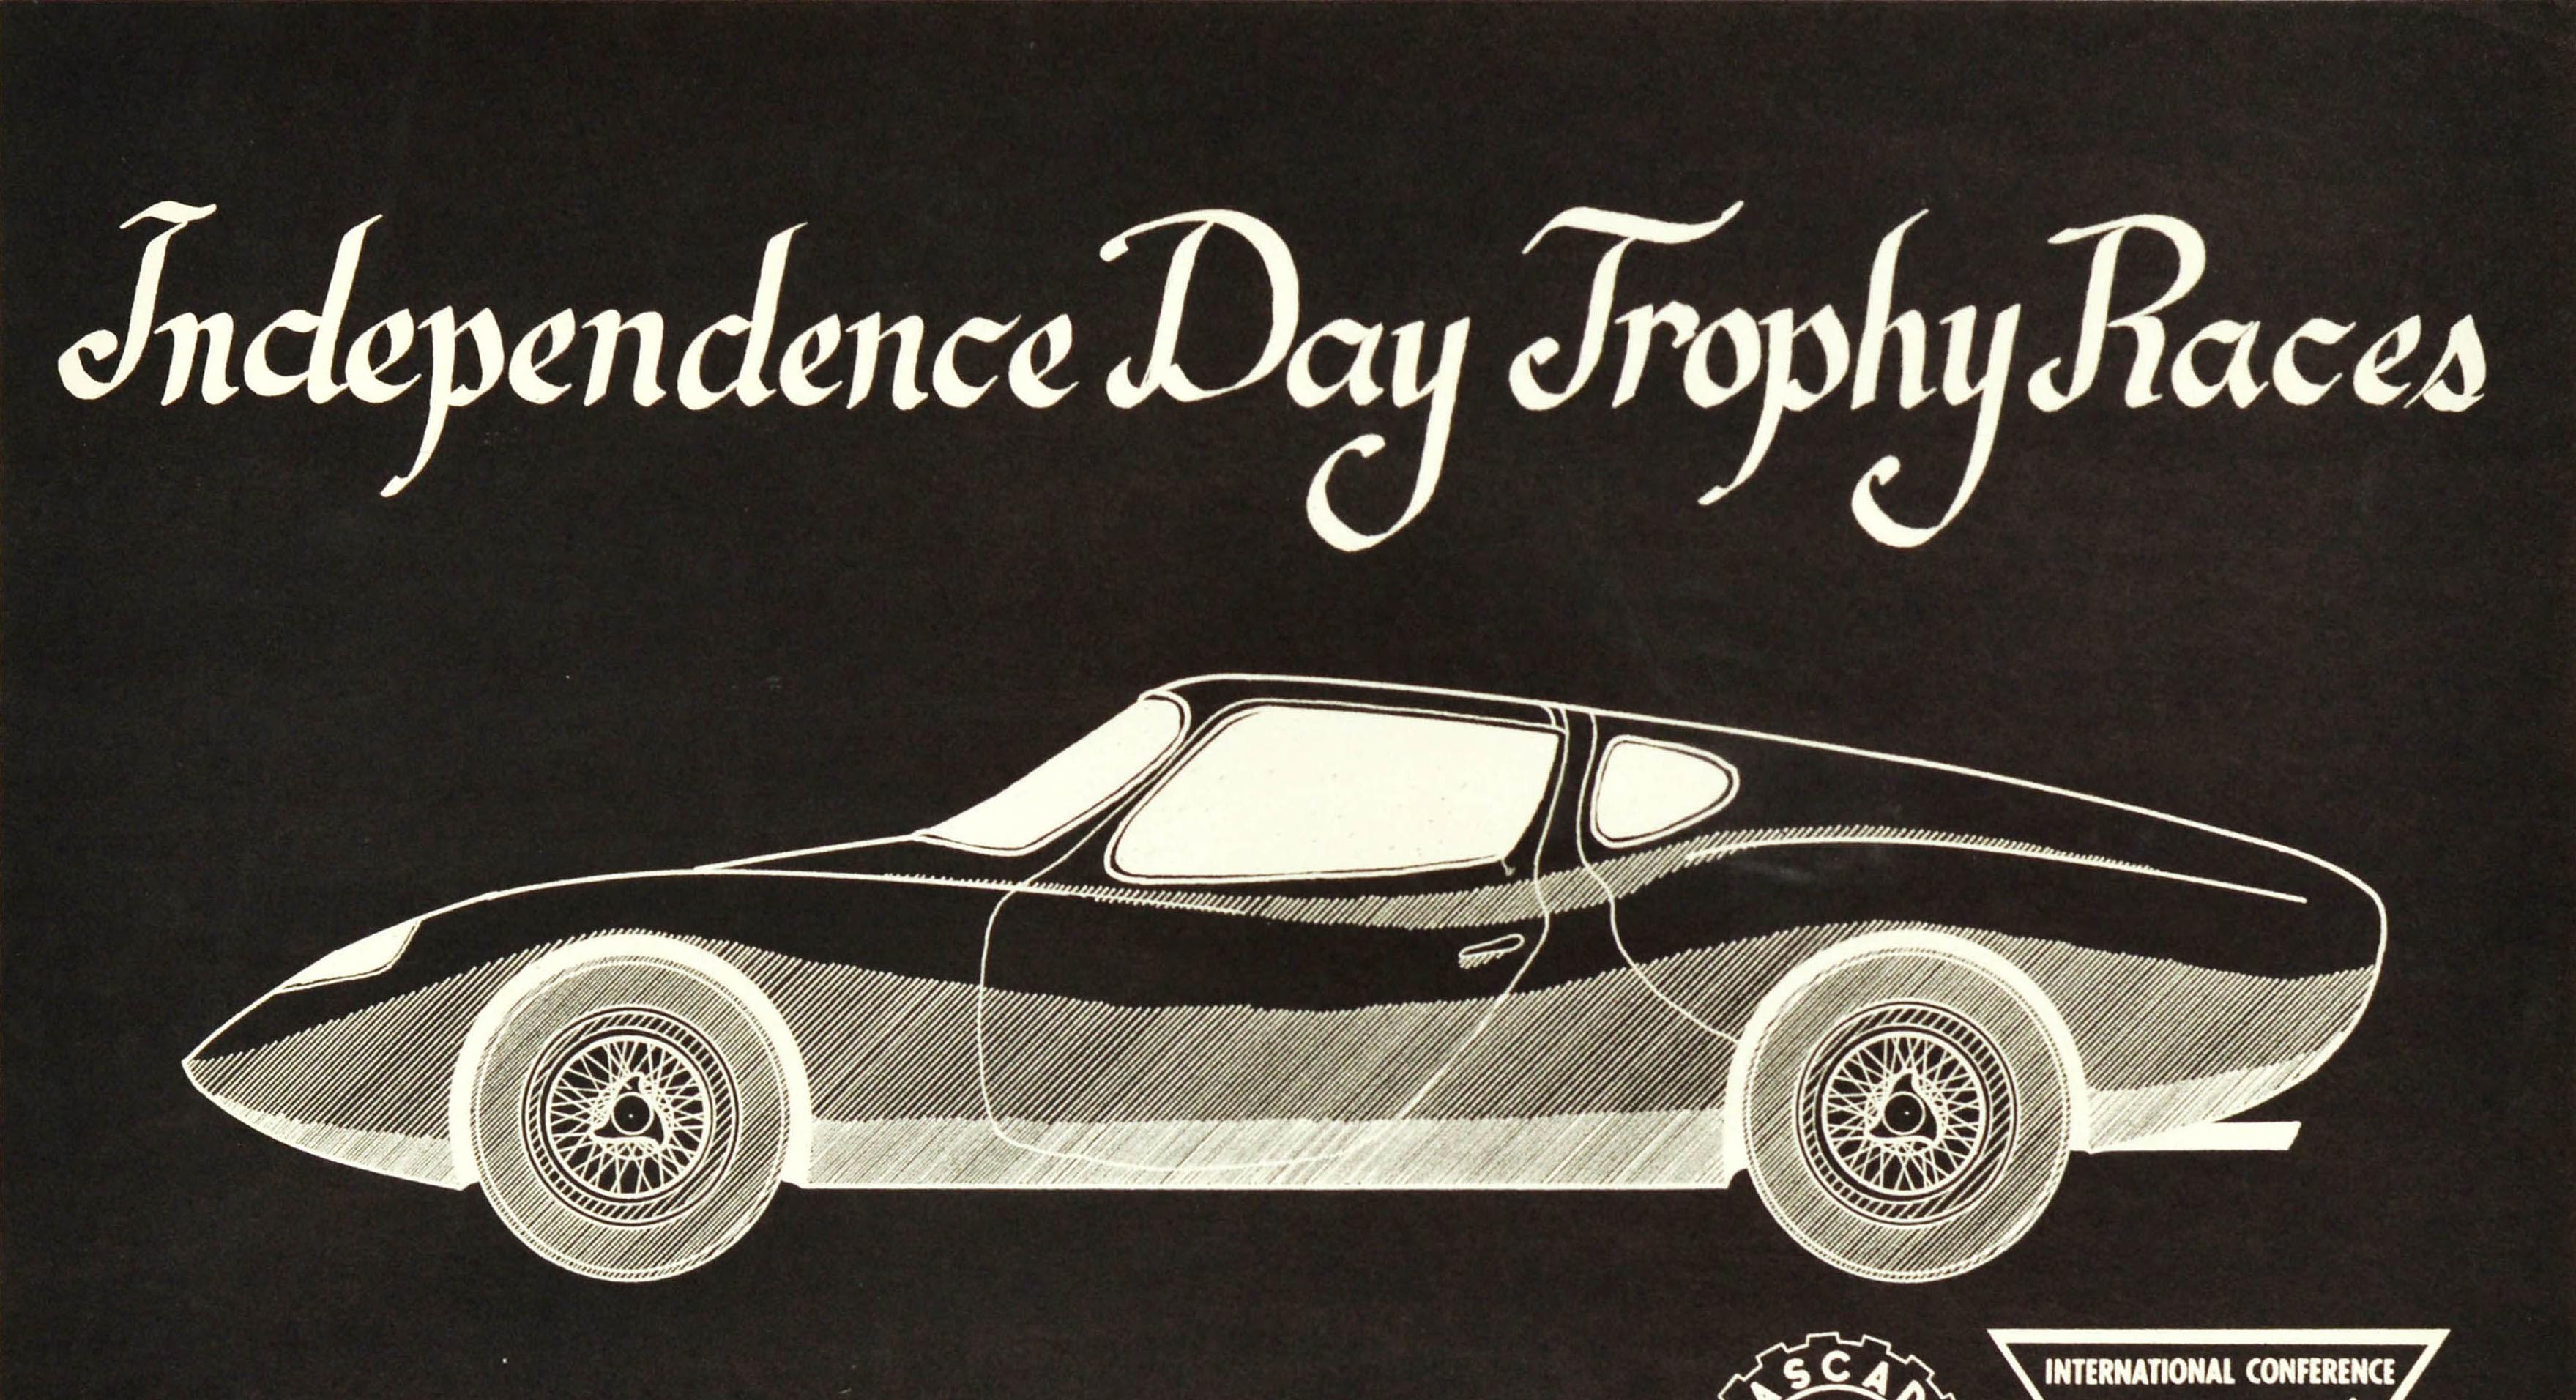 Original Vintage Racing Poster Independence Day Trophy Races Sports Car Club Art - Print by Unknown